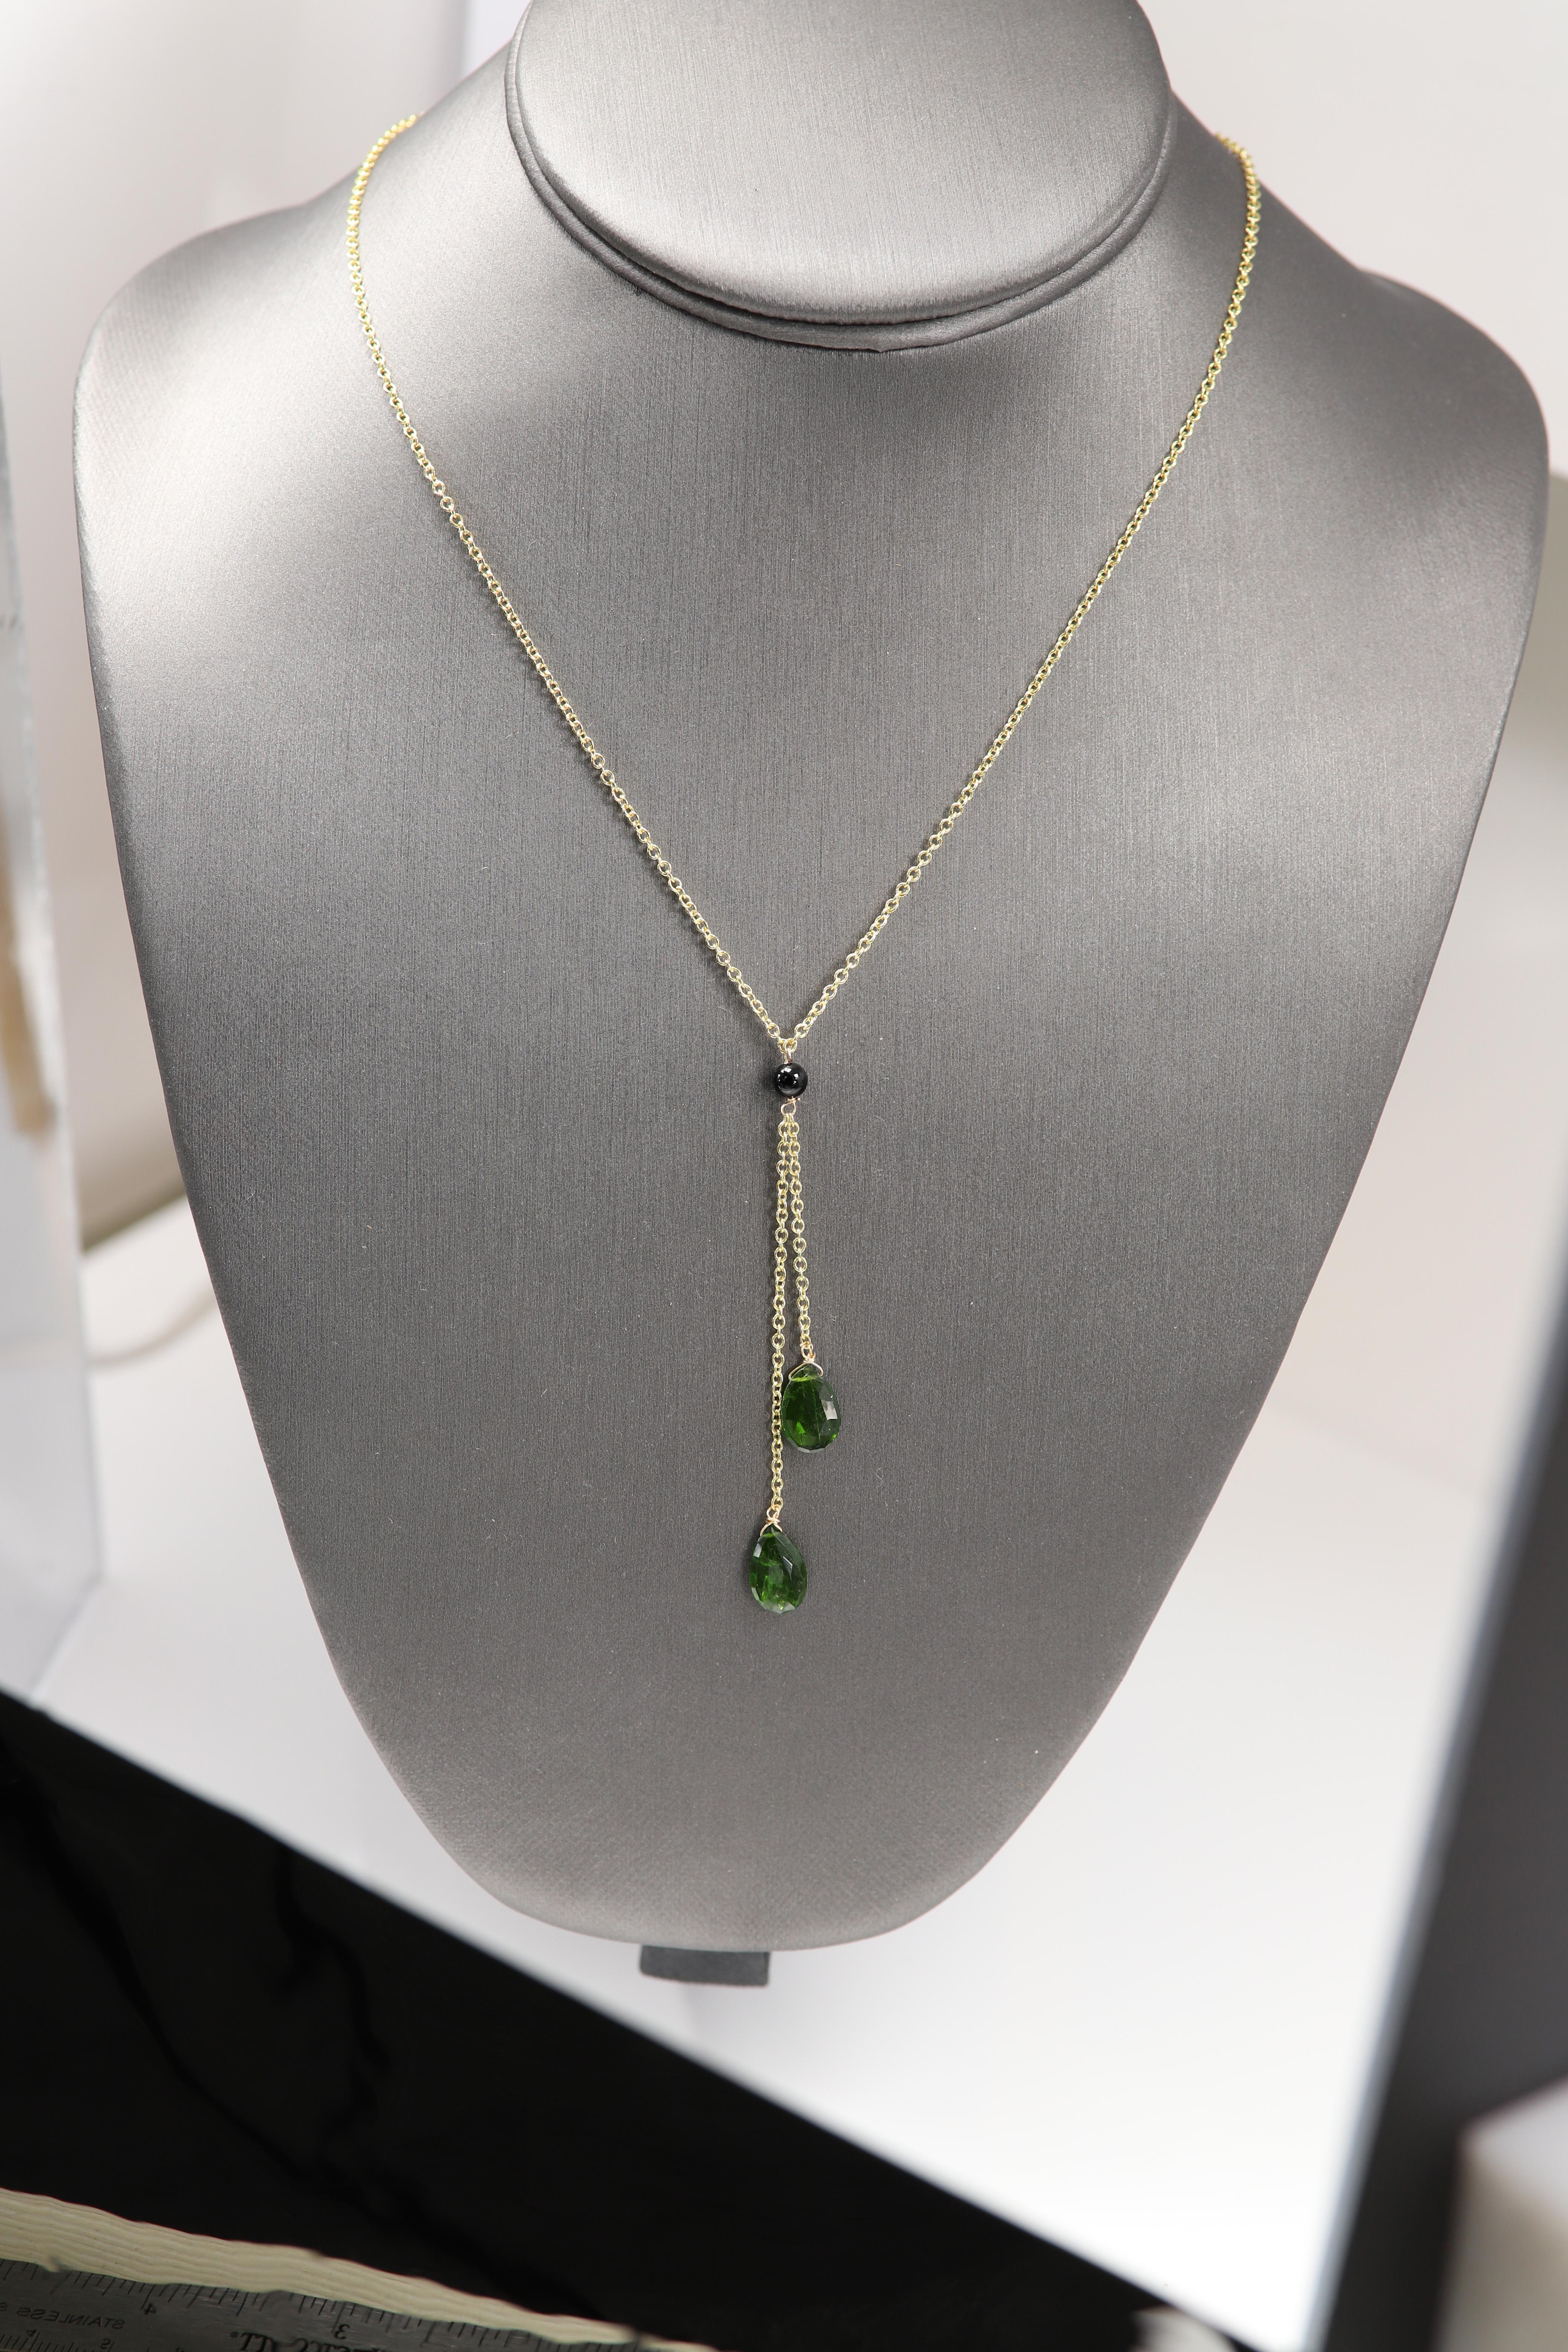 Elegant and Classic Beaded Dangling Green Tourmaline Necklace

14k Yellow Gold – Cable chain with wire work (all parts are 14k gold)
Chain Length 17’ Inch
Stone type: Natural Tourmaline with minor facets pear shape cut
Stone Color: Green
Stones